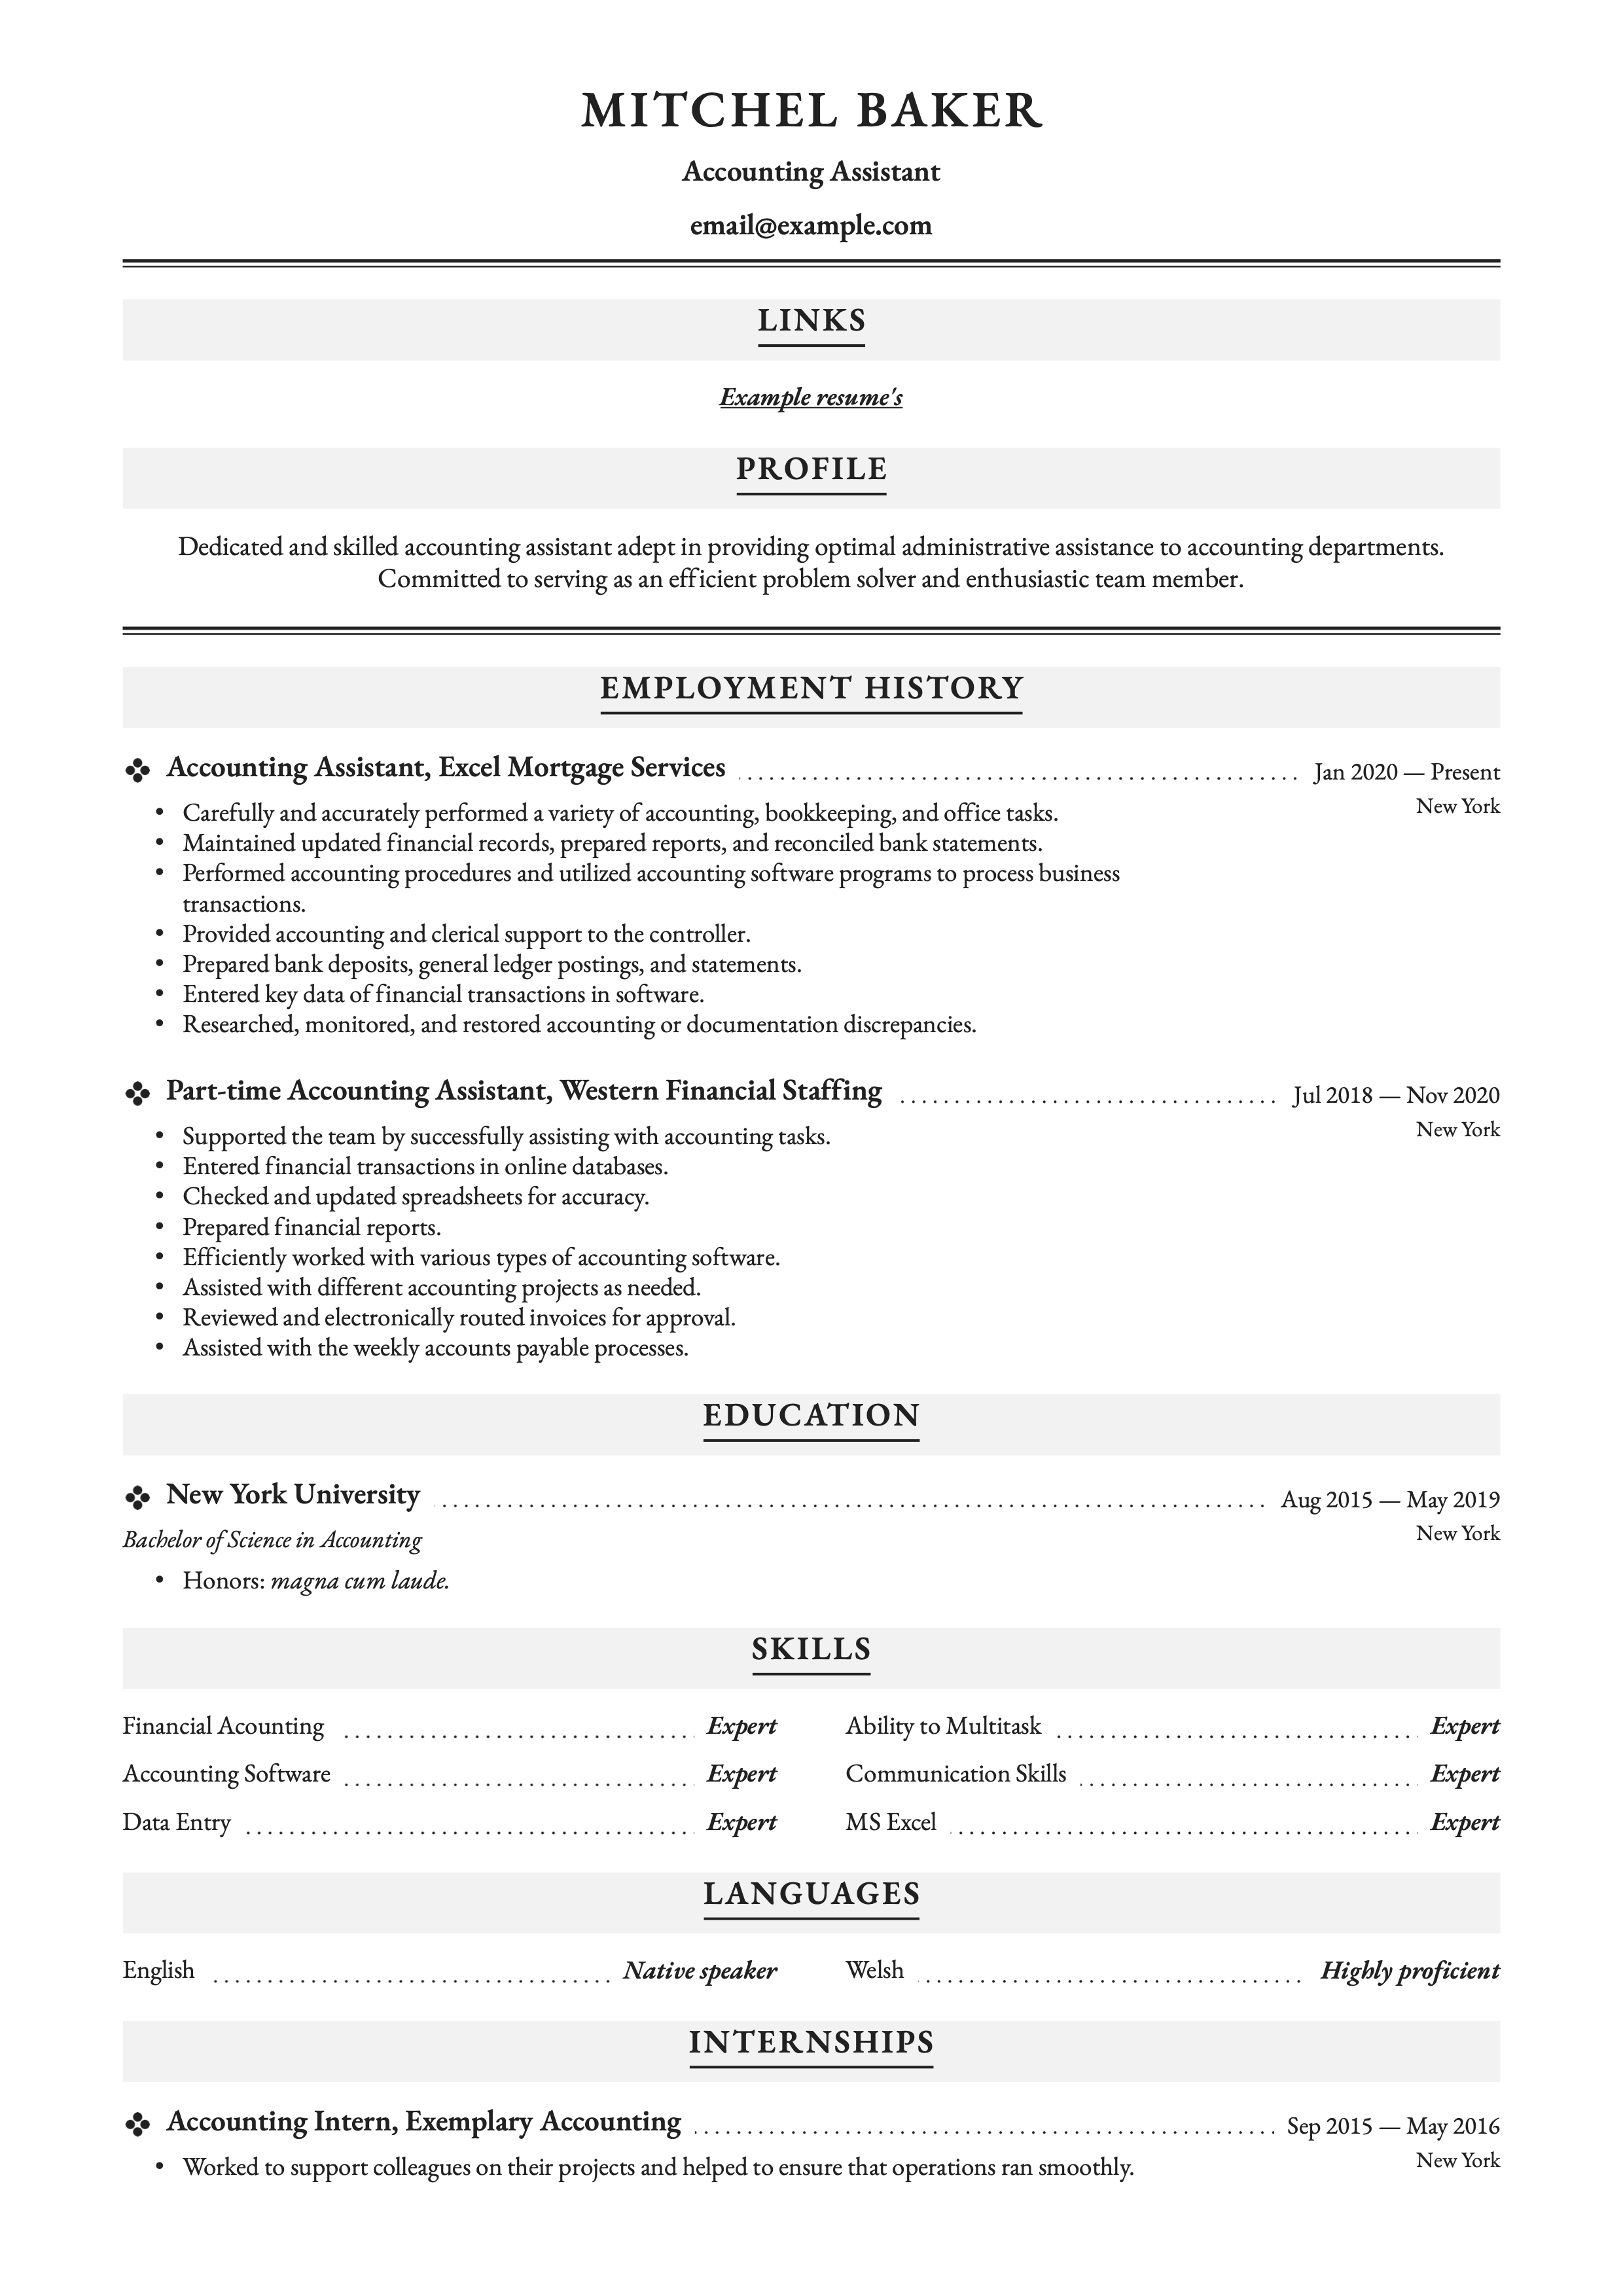 Accounting Assistant Resume